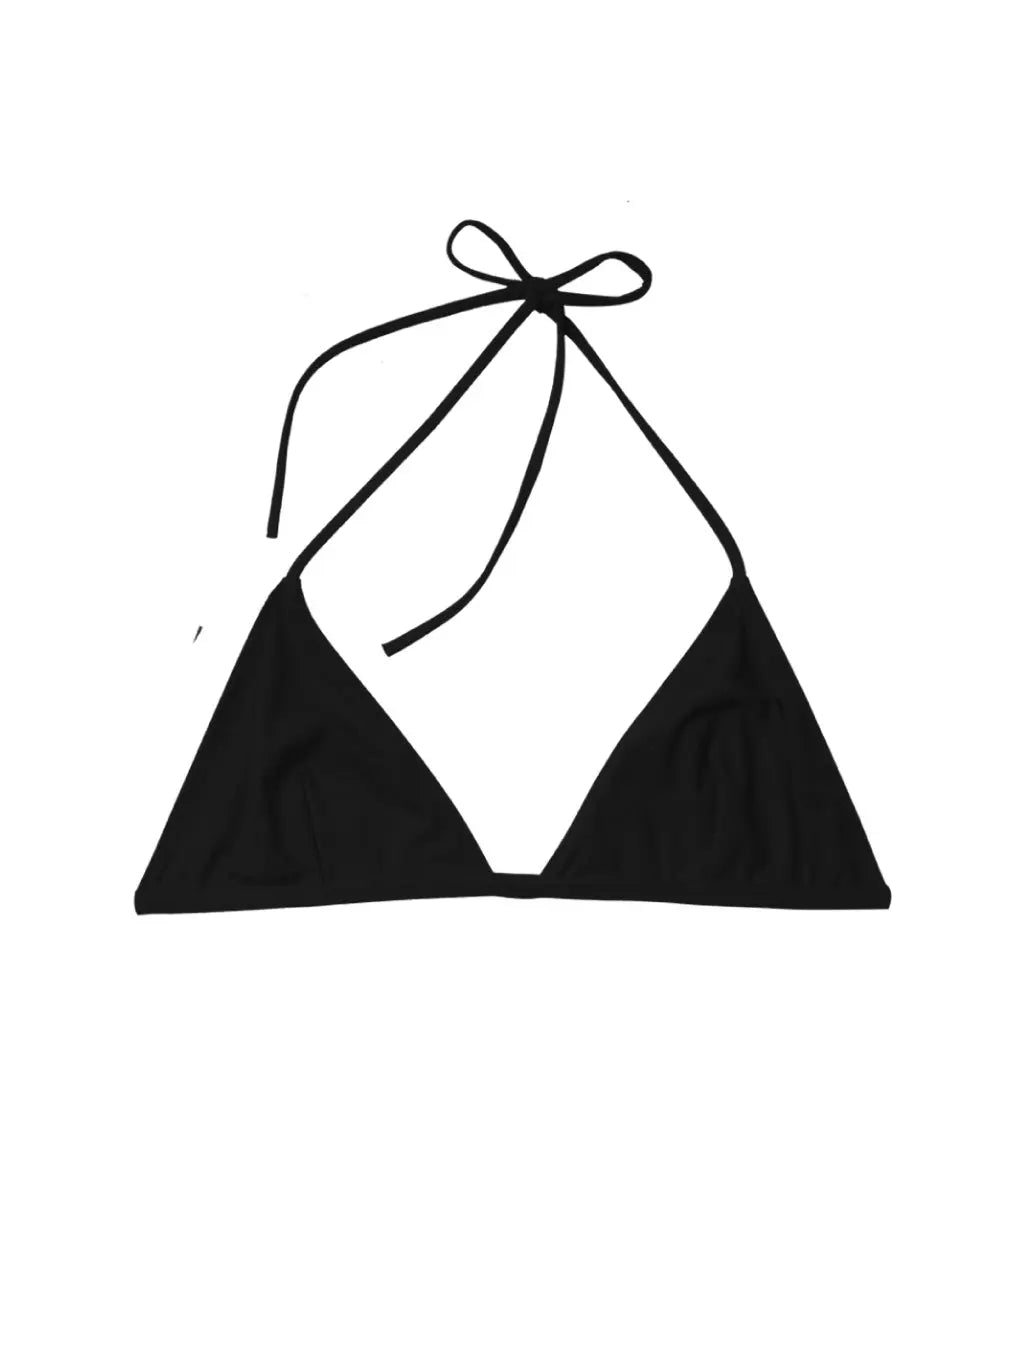 A Trentotto Black Bikini Top with thin straps tied at the neck and a back closure. The design is simple and minimalistic, embodying chic elegance. Displayed against a plain white background, this piece from Lido in Barcelona exudes effortless style.